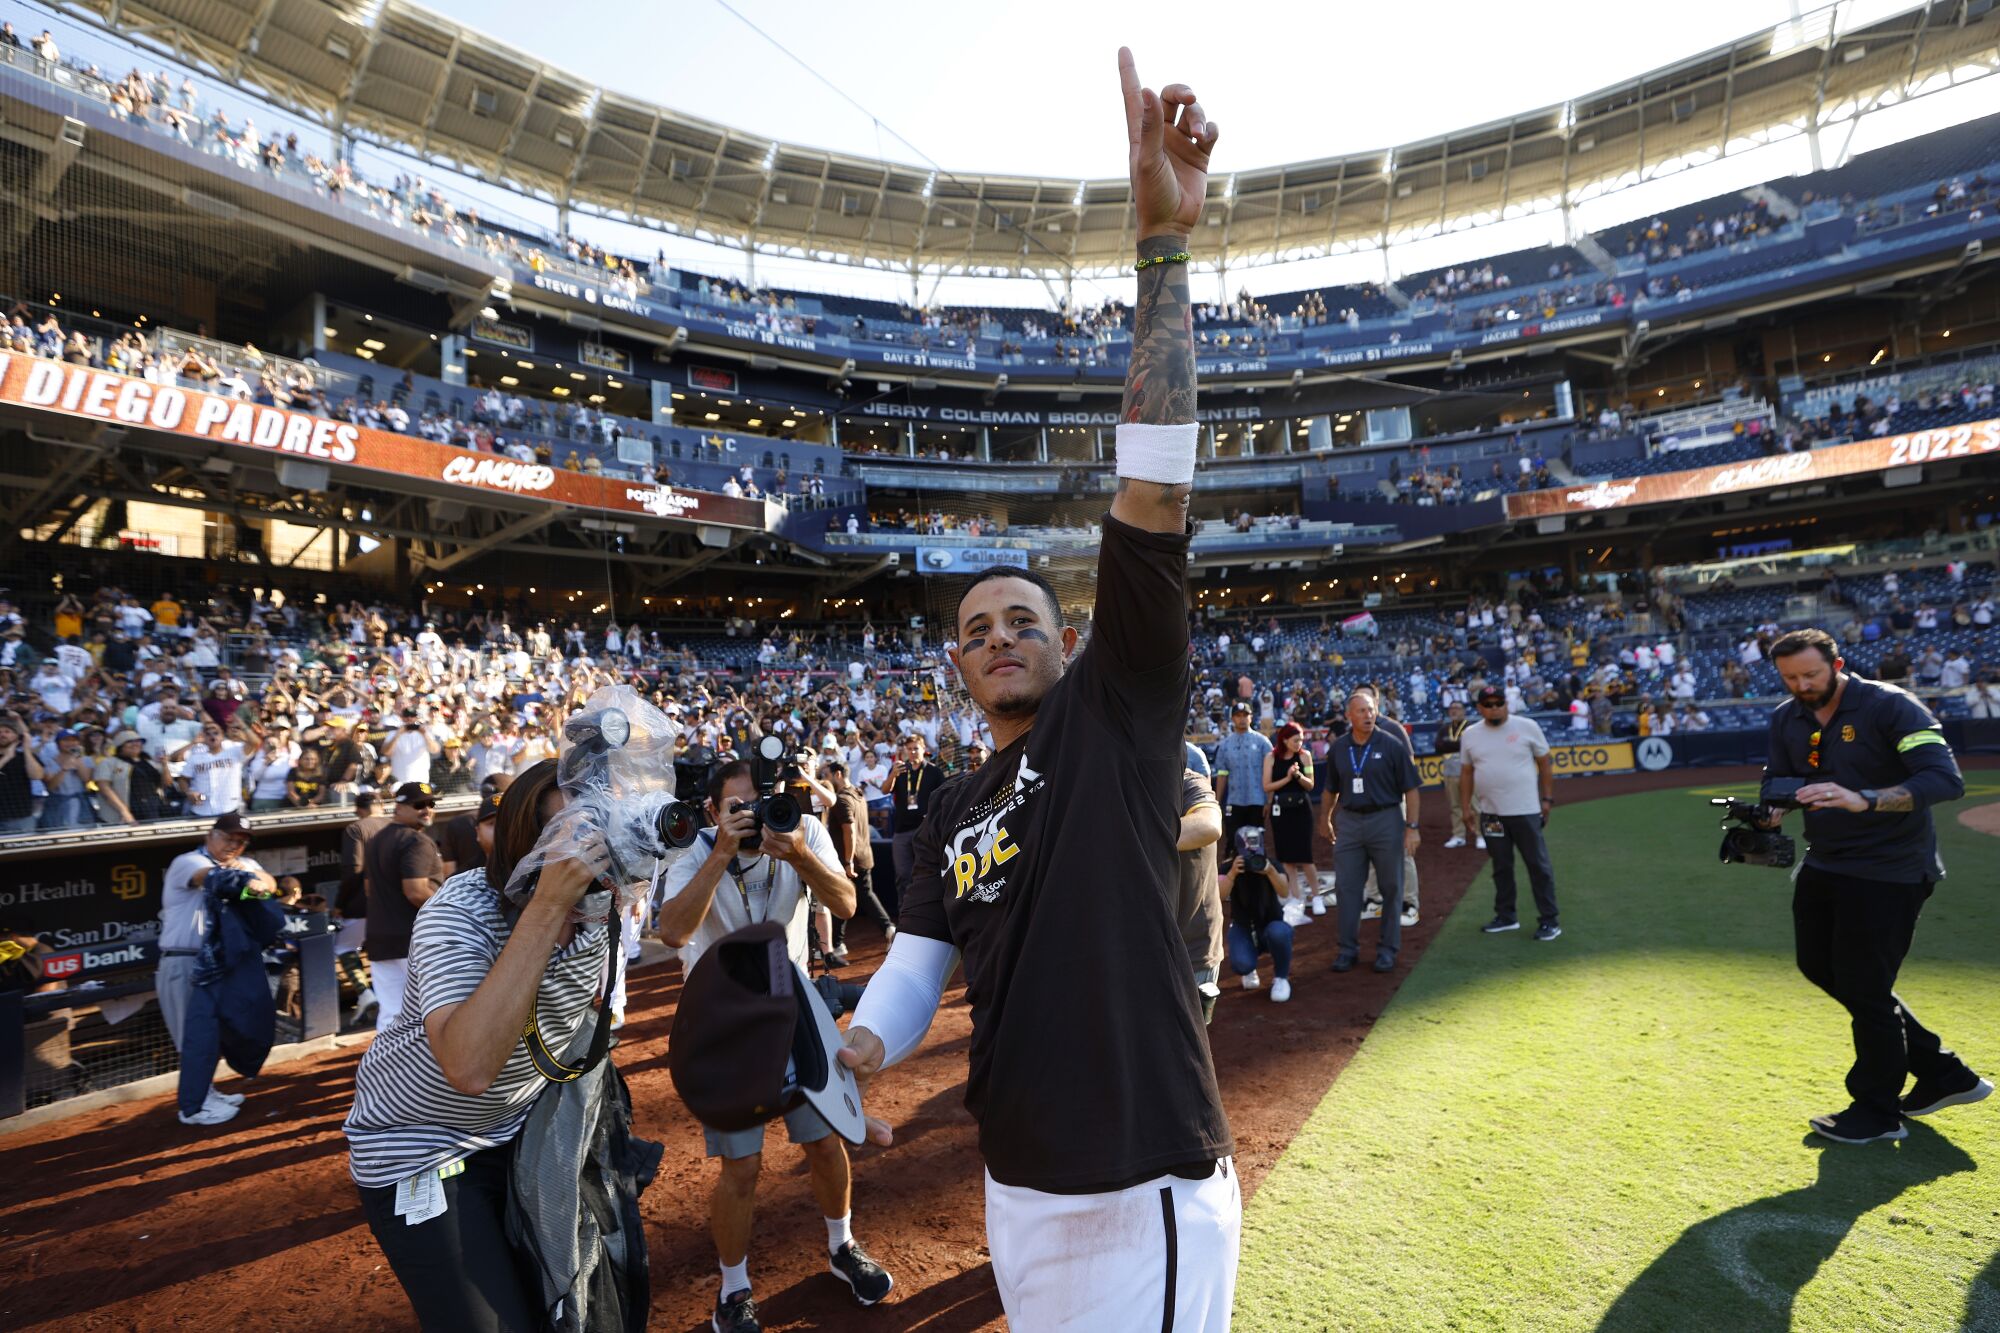  San Diego Padres' Manny Machado celebrates on the field after the team clinched a wildcard playoff spot